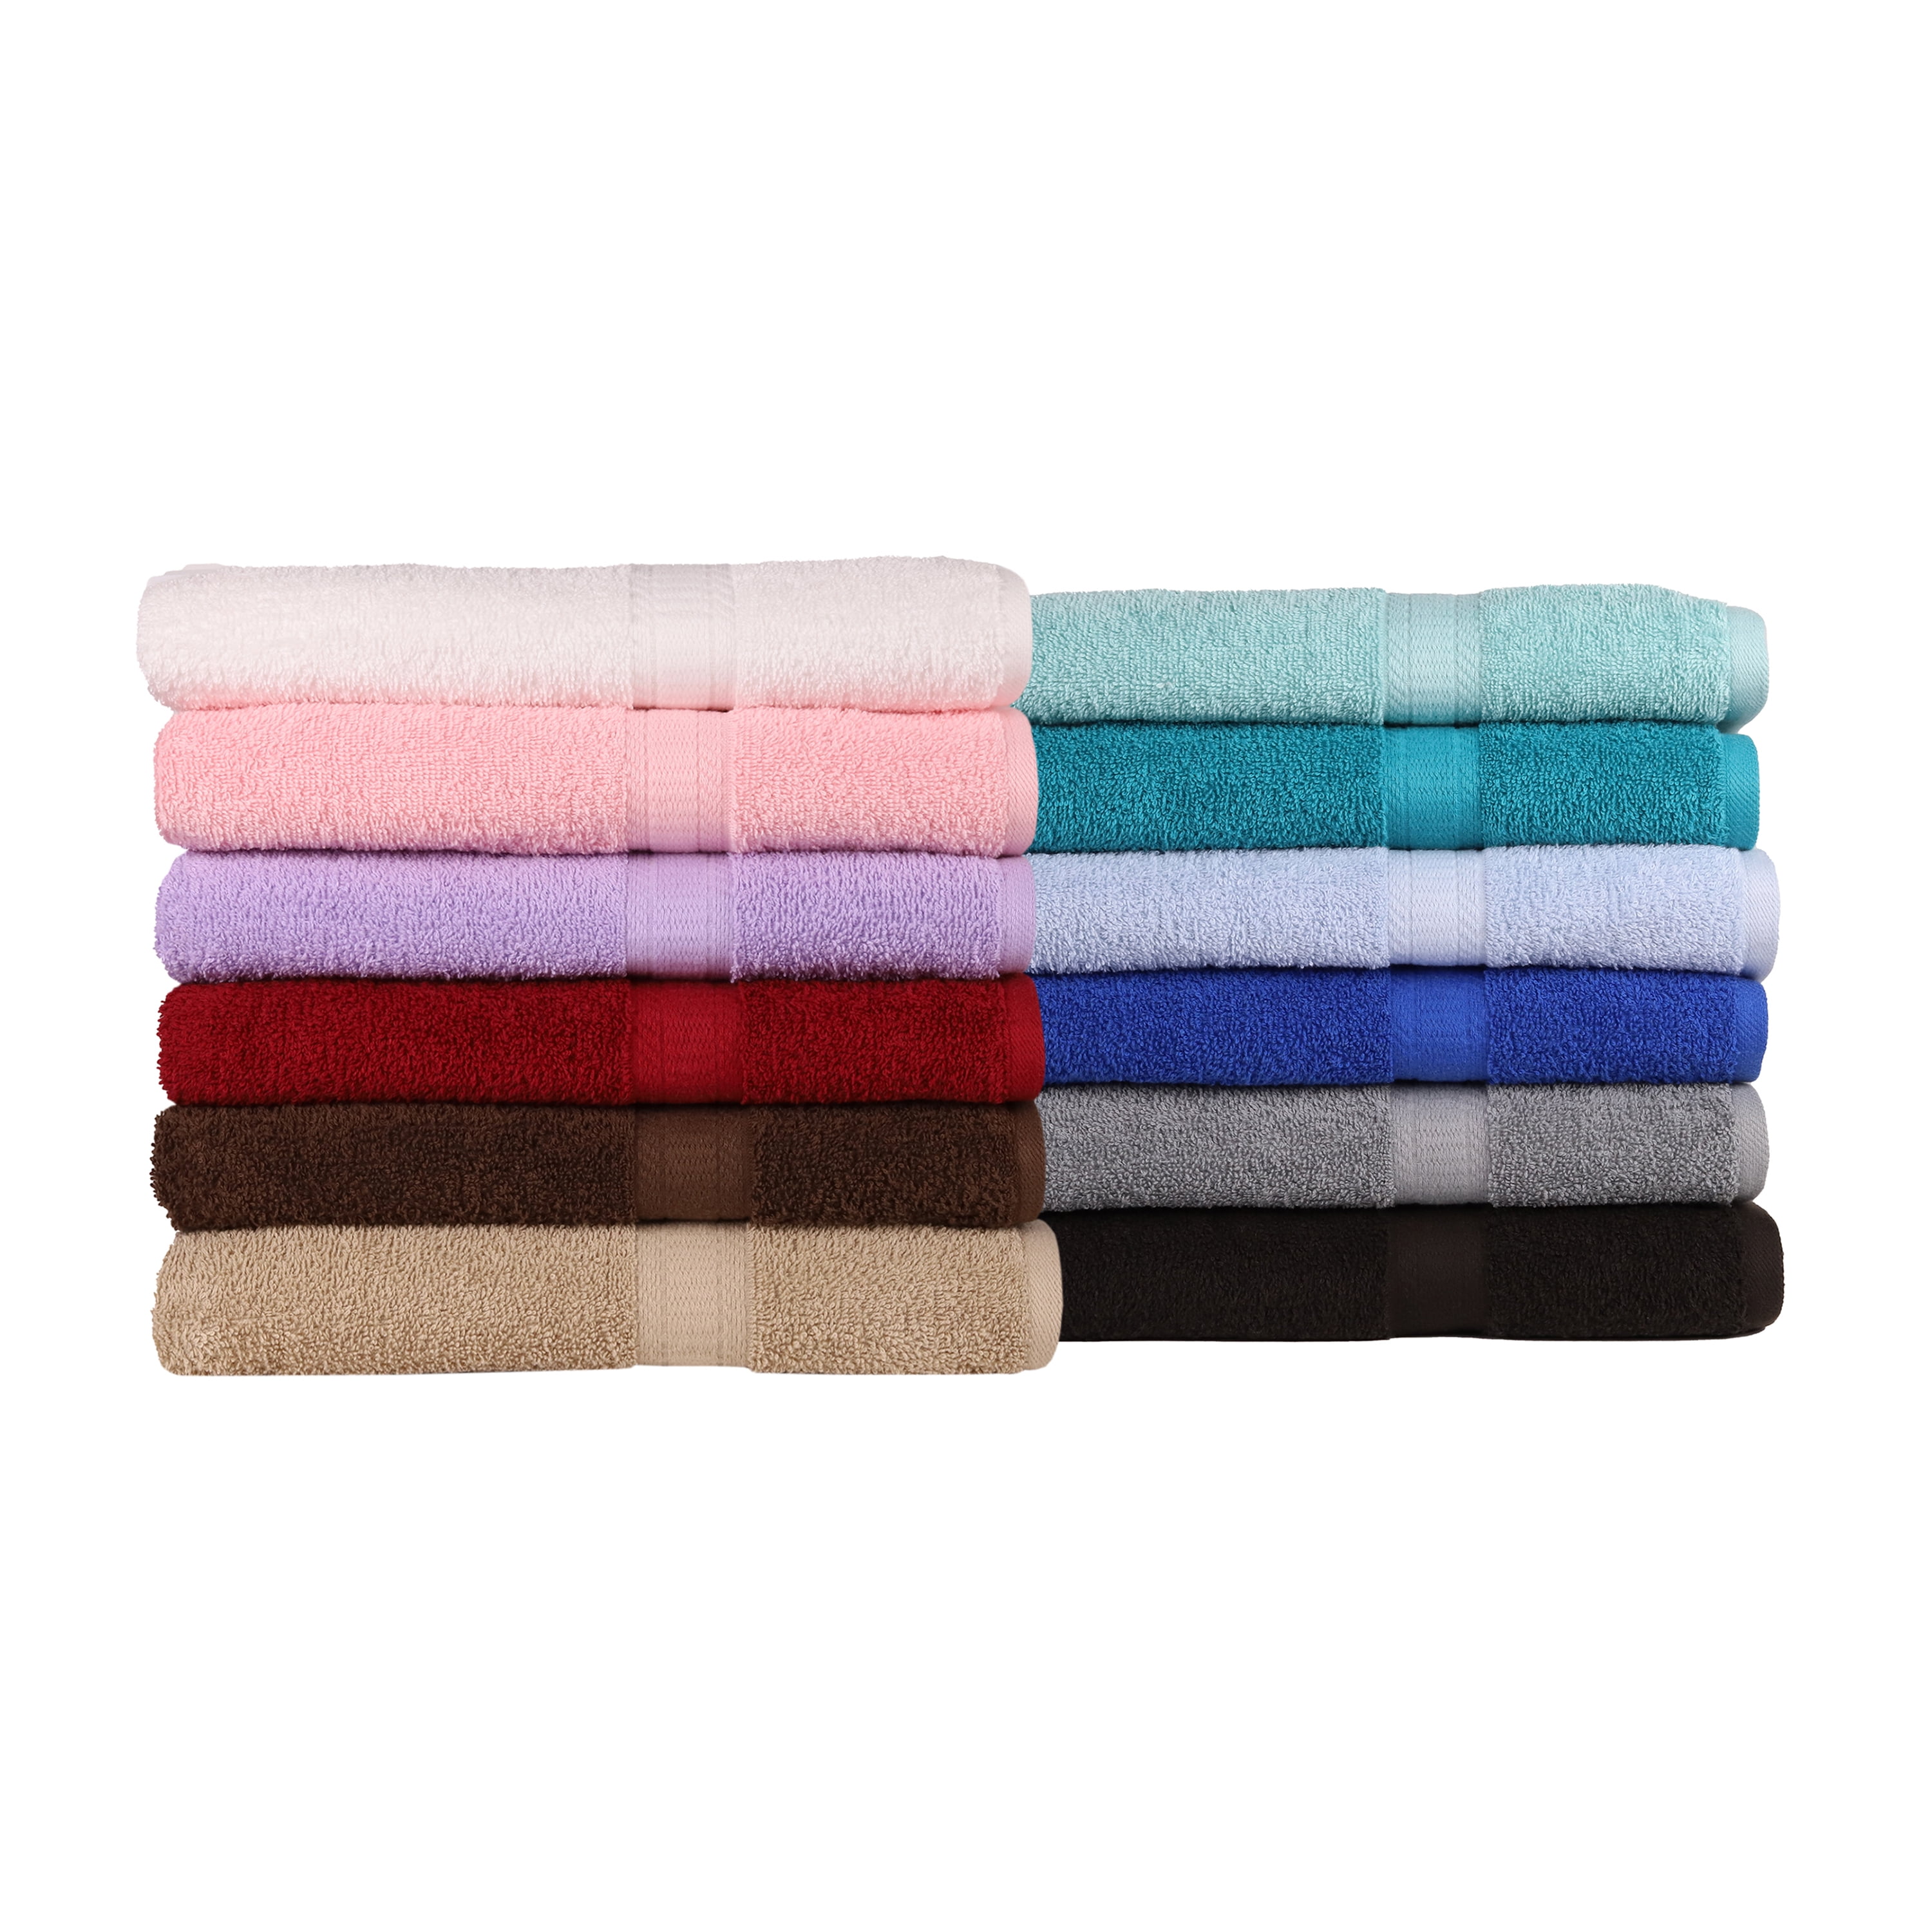 Lincraft Bath Towels 27x54 Inches Multiple Colors 18 Lbs 100% Cotton 6&12 Piece 